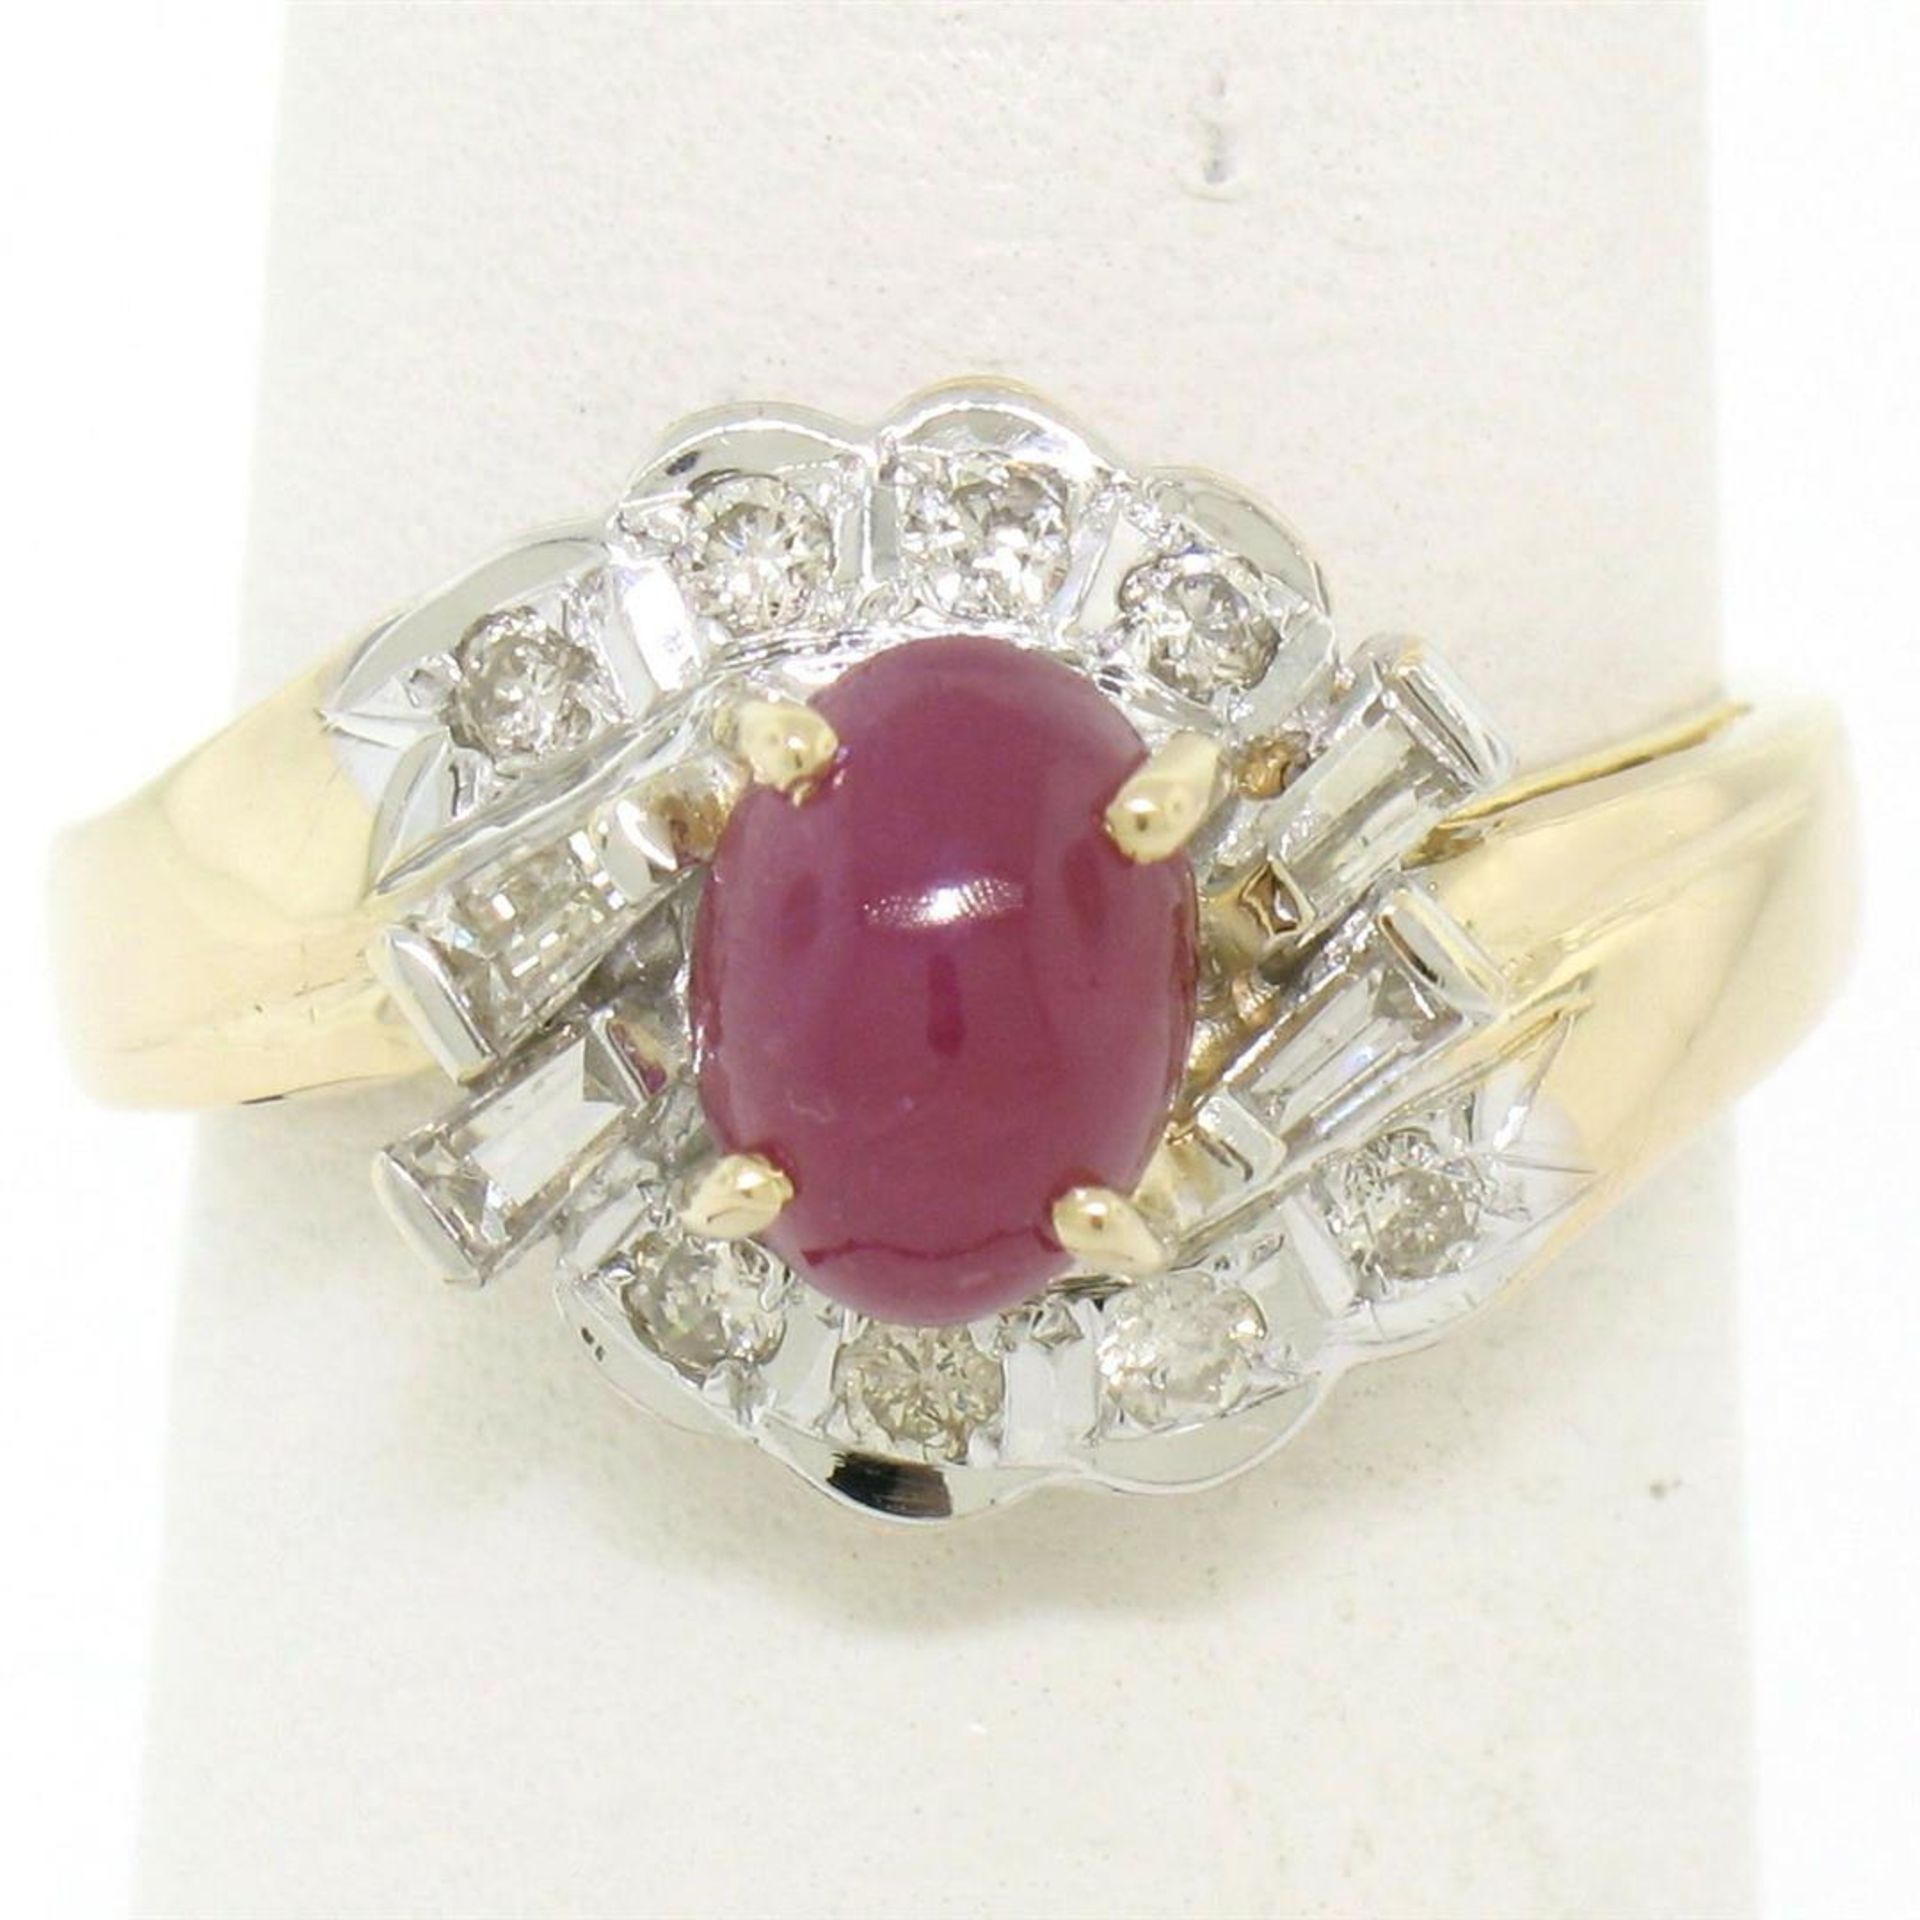 14kt White and Yellow Gold Cabochon Ruby and Diamond Ring - Image 2 of 7